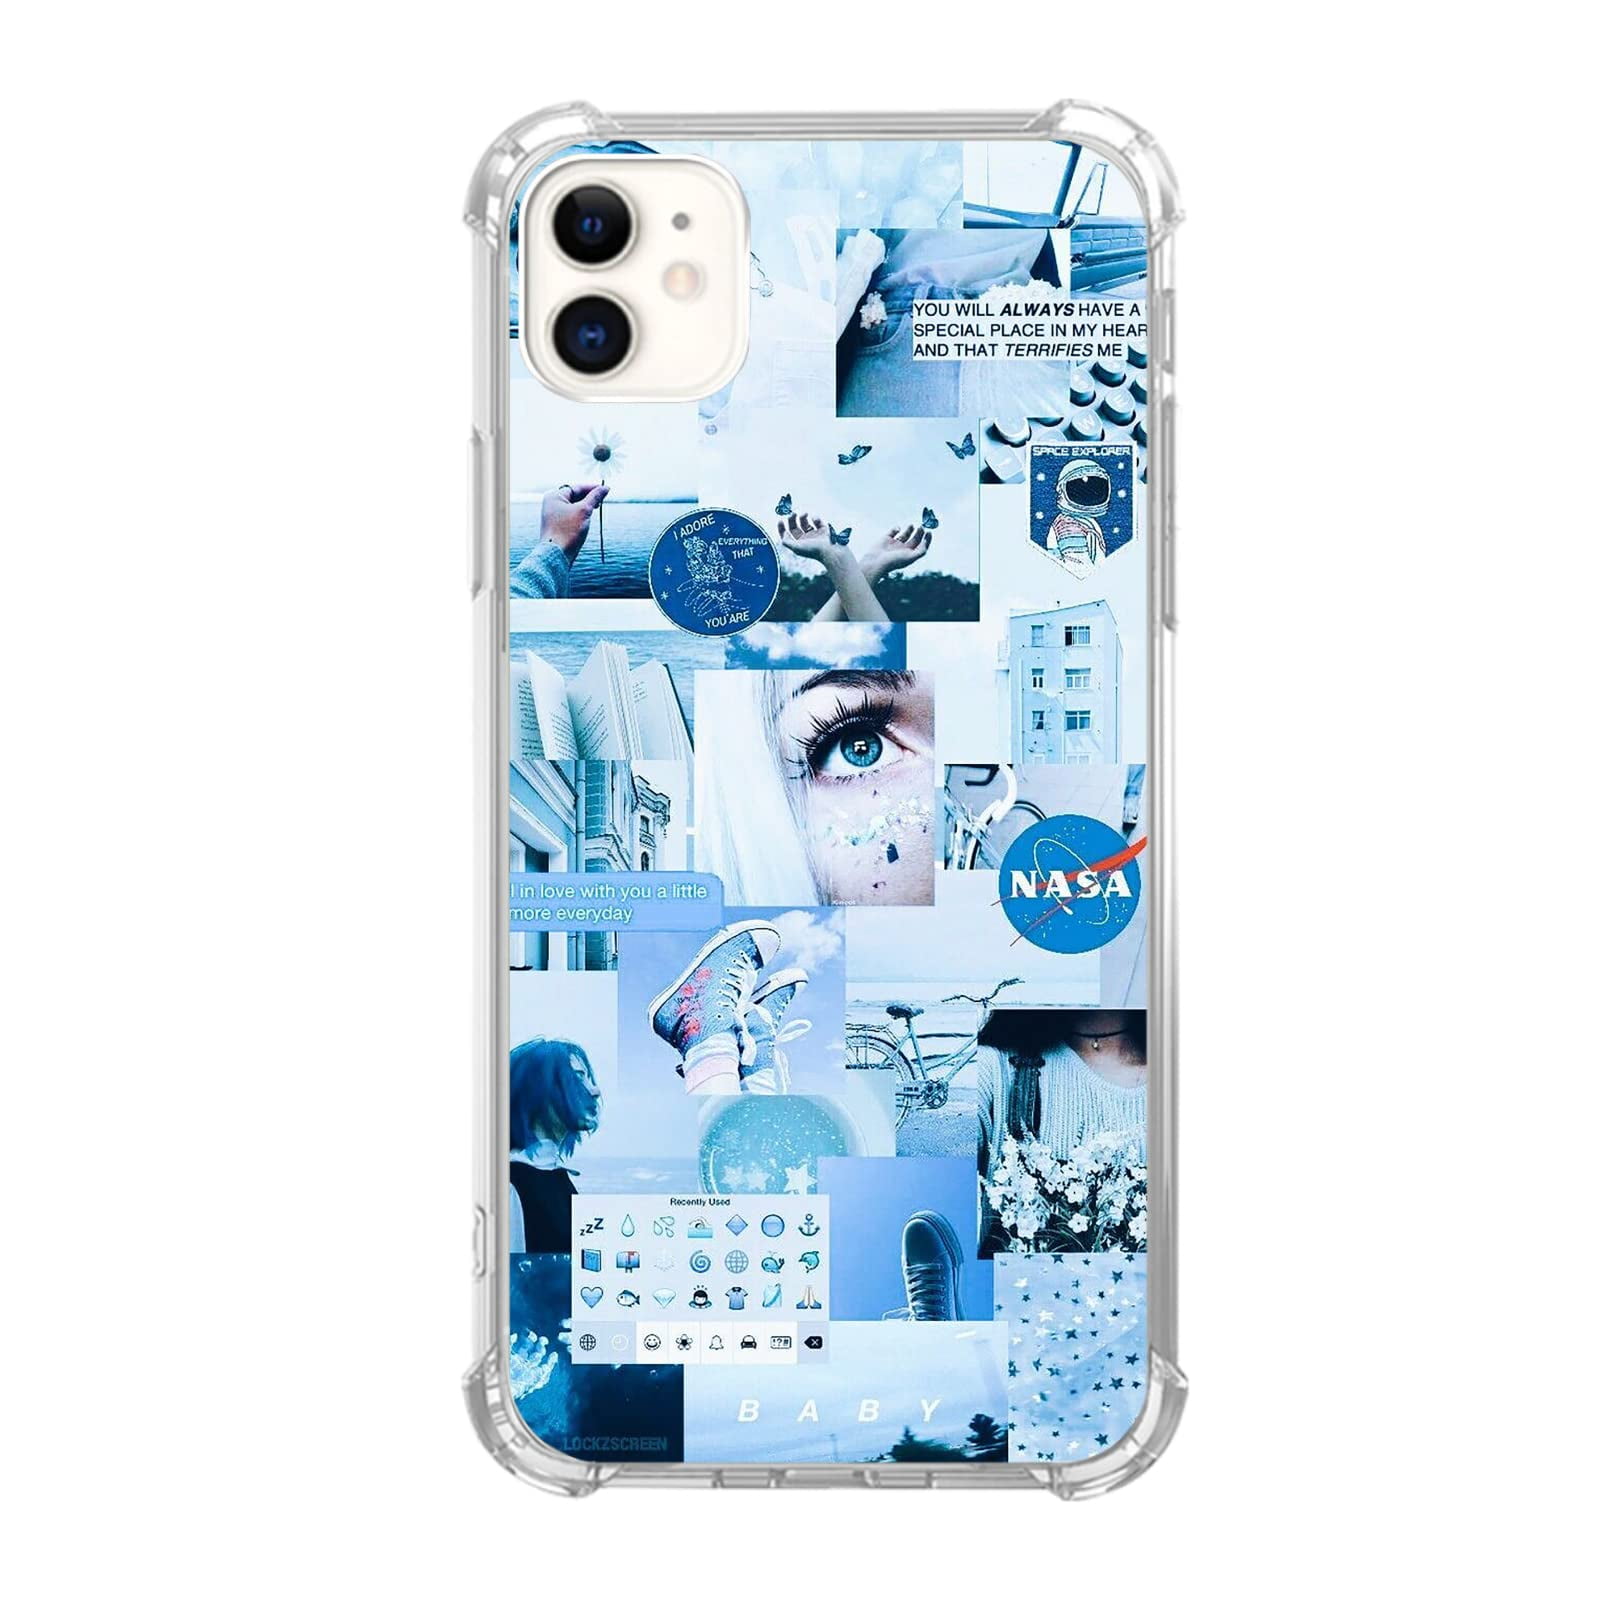 ▷ Artscase  Unique Artistic iPhone Cases Designed by Global Artists